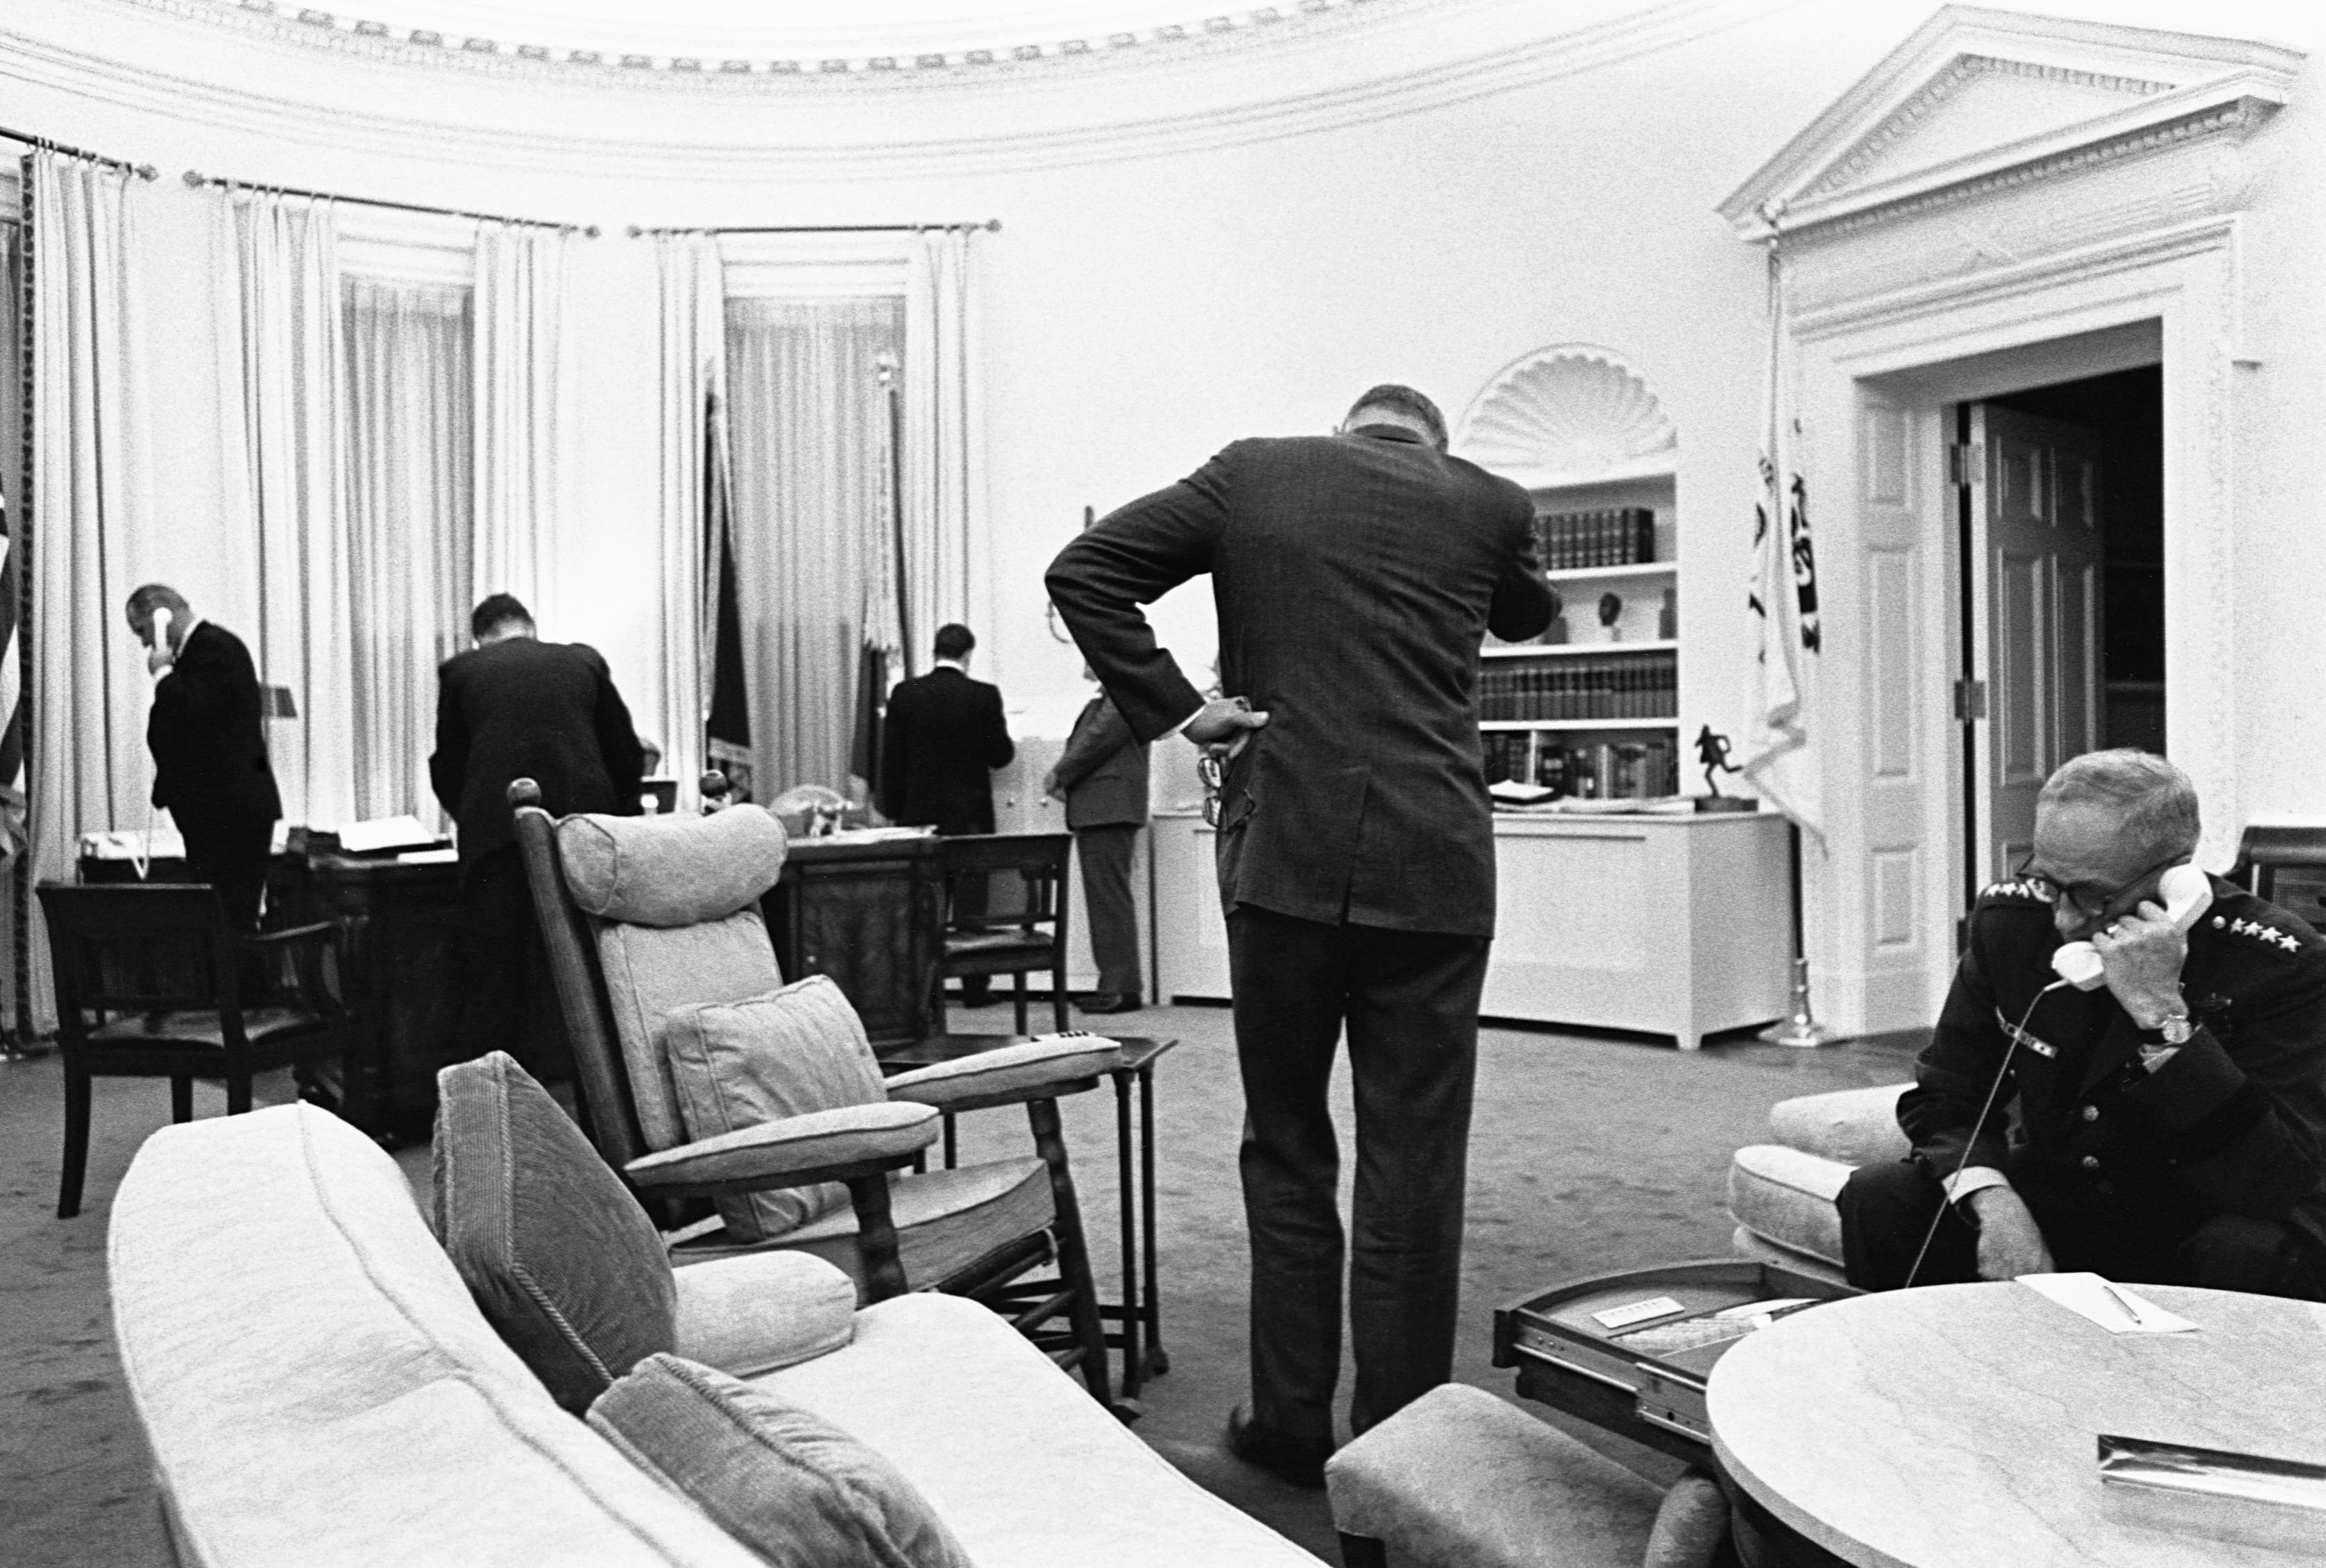 President Lyndon B. Johnson and his advisers gather in the Oval Office to communicate with Federal troops sent in to quell race riots in Detroit, and to plan their handling of the crisis. 1967.